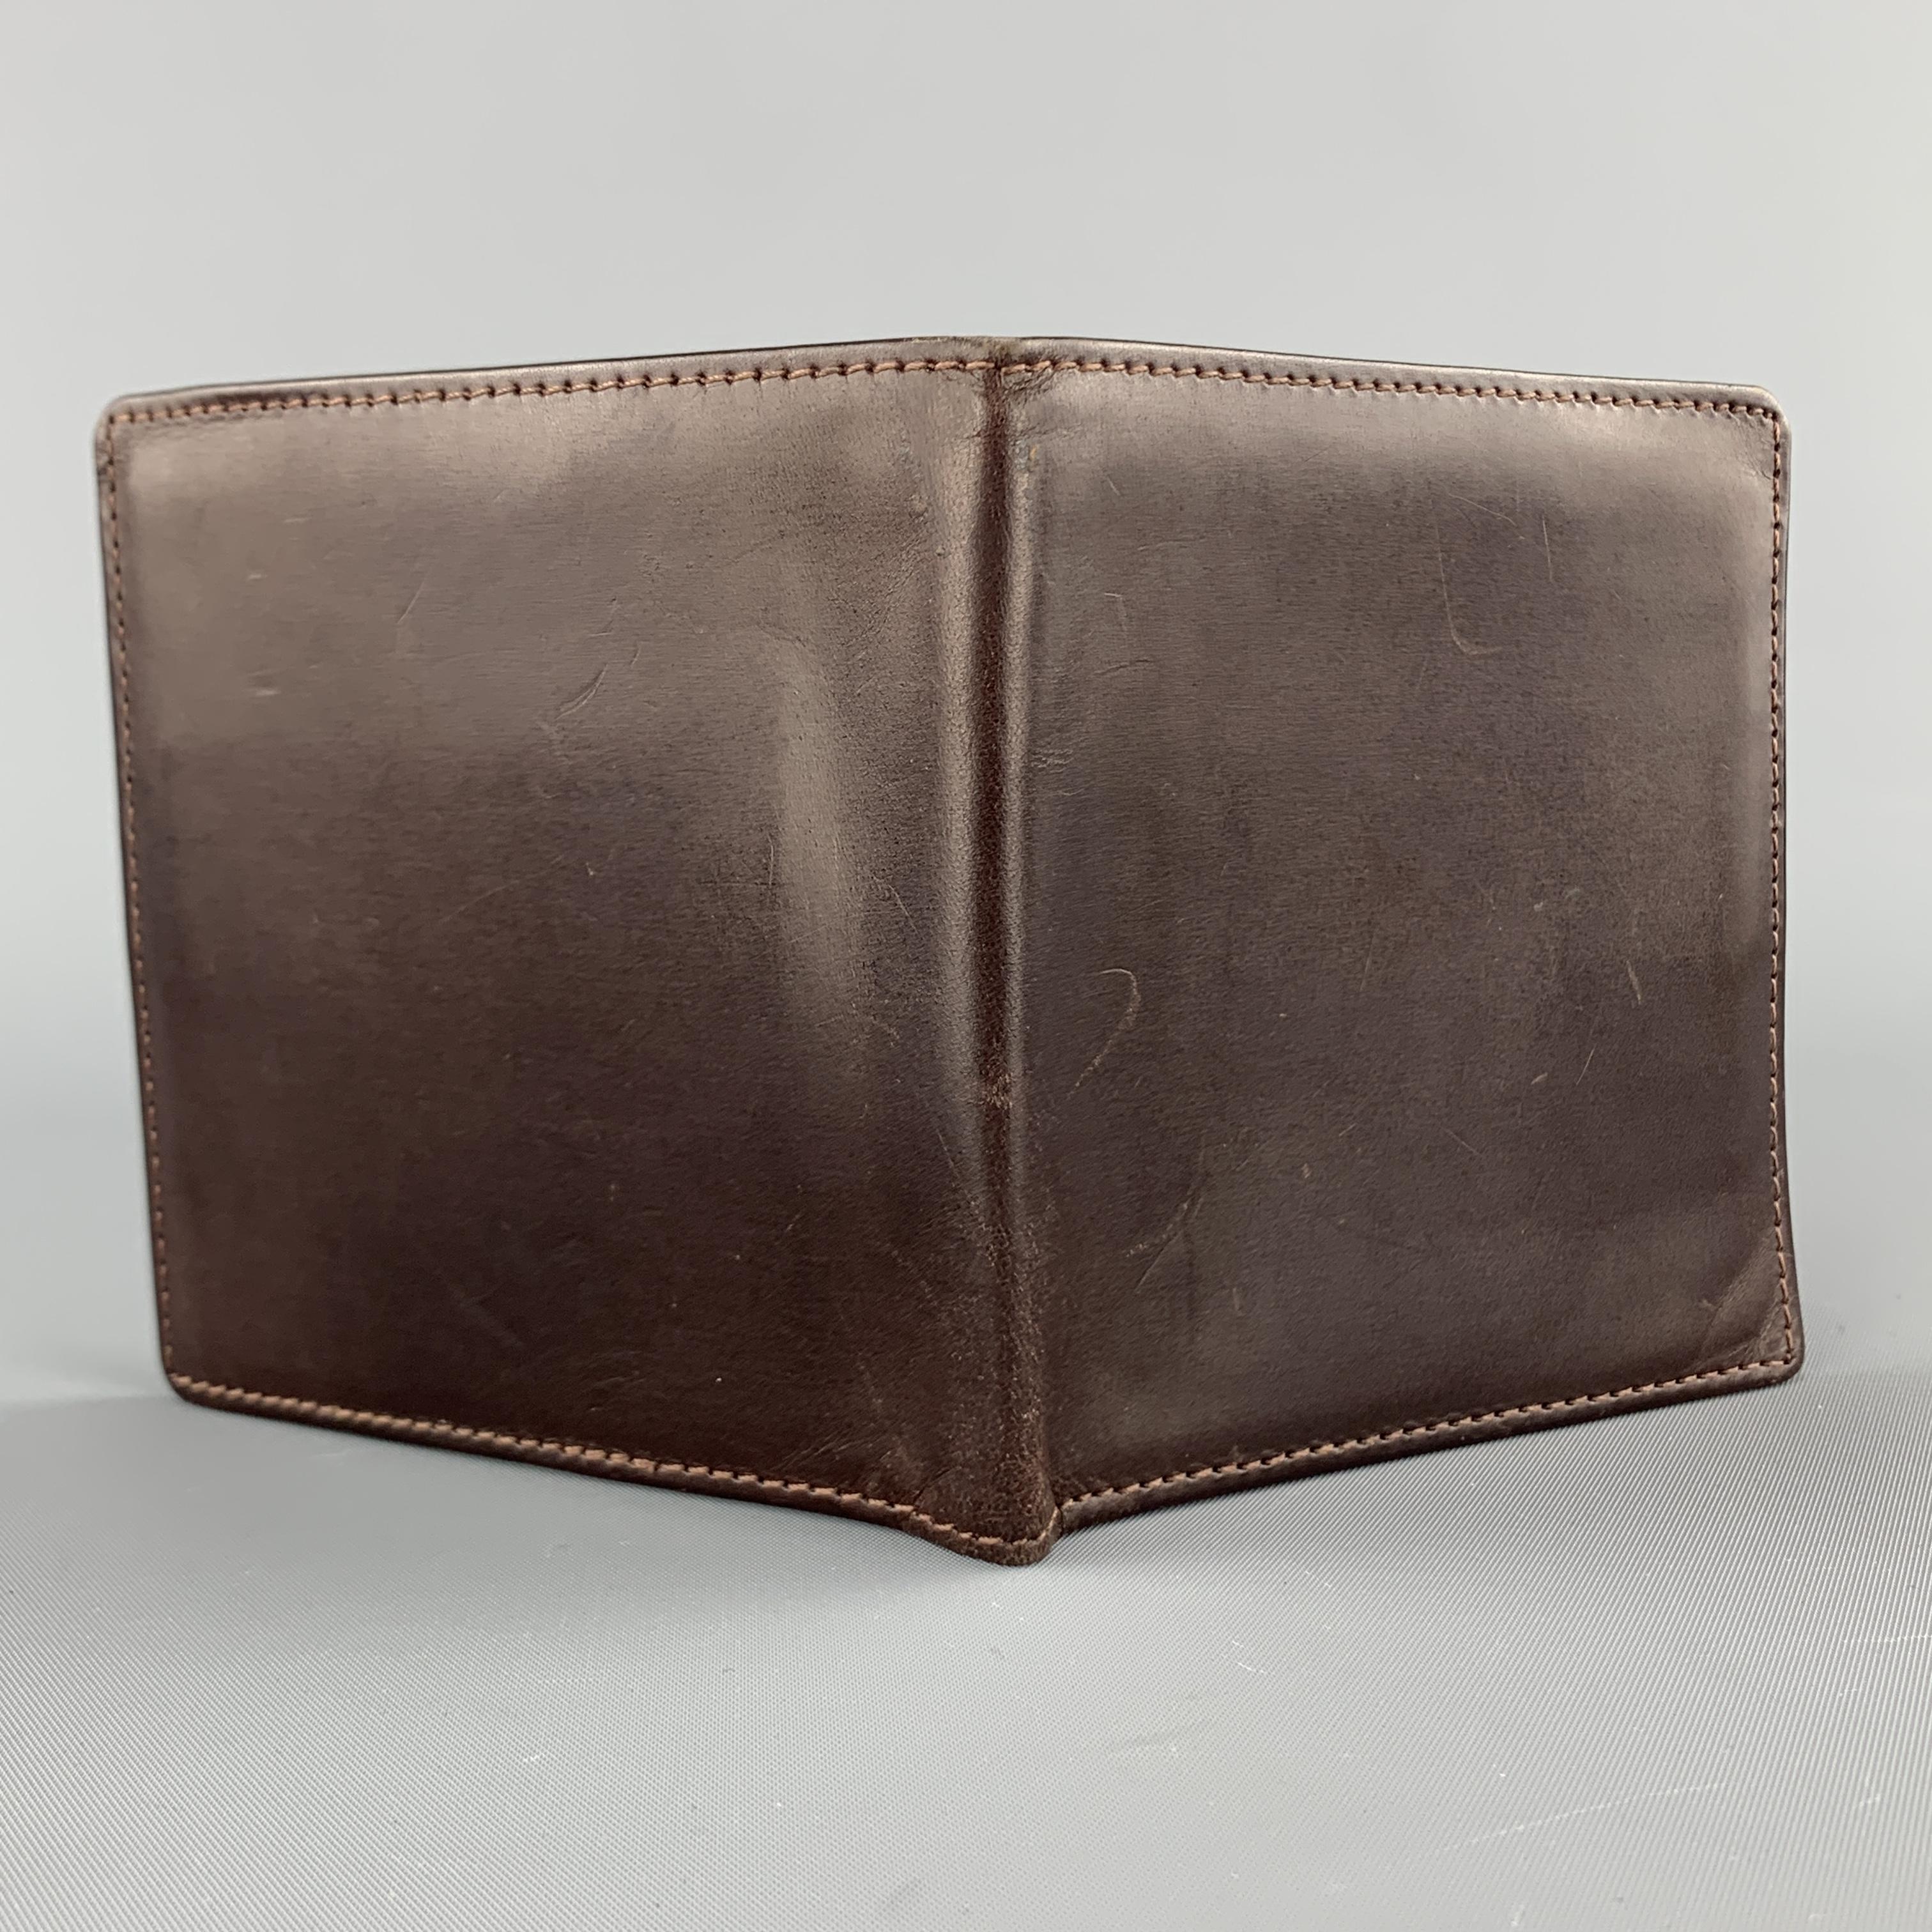 FOSTER & SON bifold wallet comes in brown leather with dual bill holders and card slots. Made in England.

Good Pre-Owned Condition.

4.5 x 4.5 in.